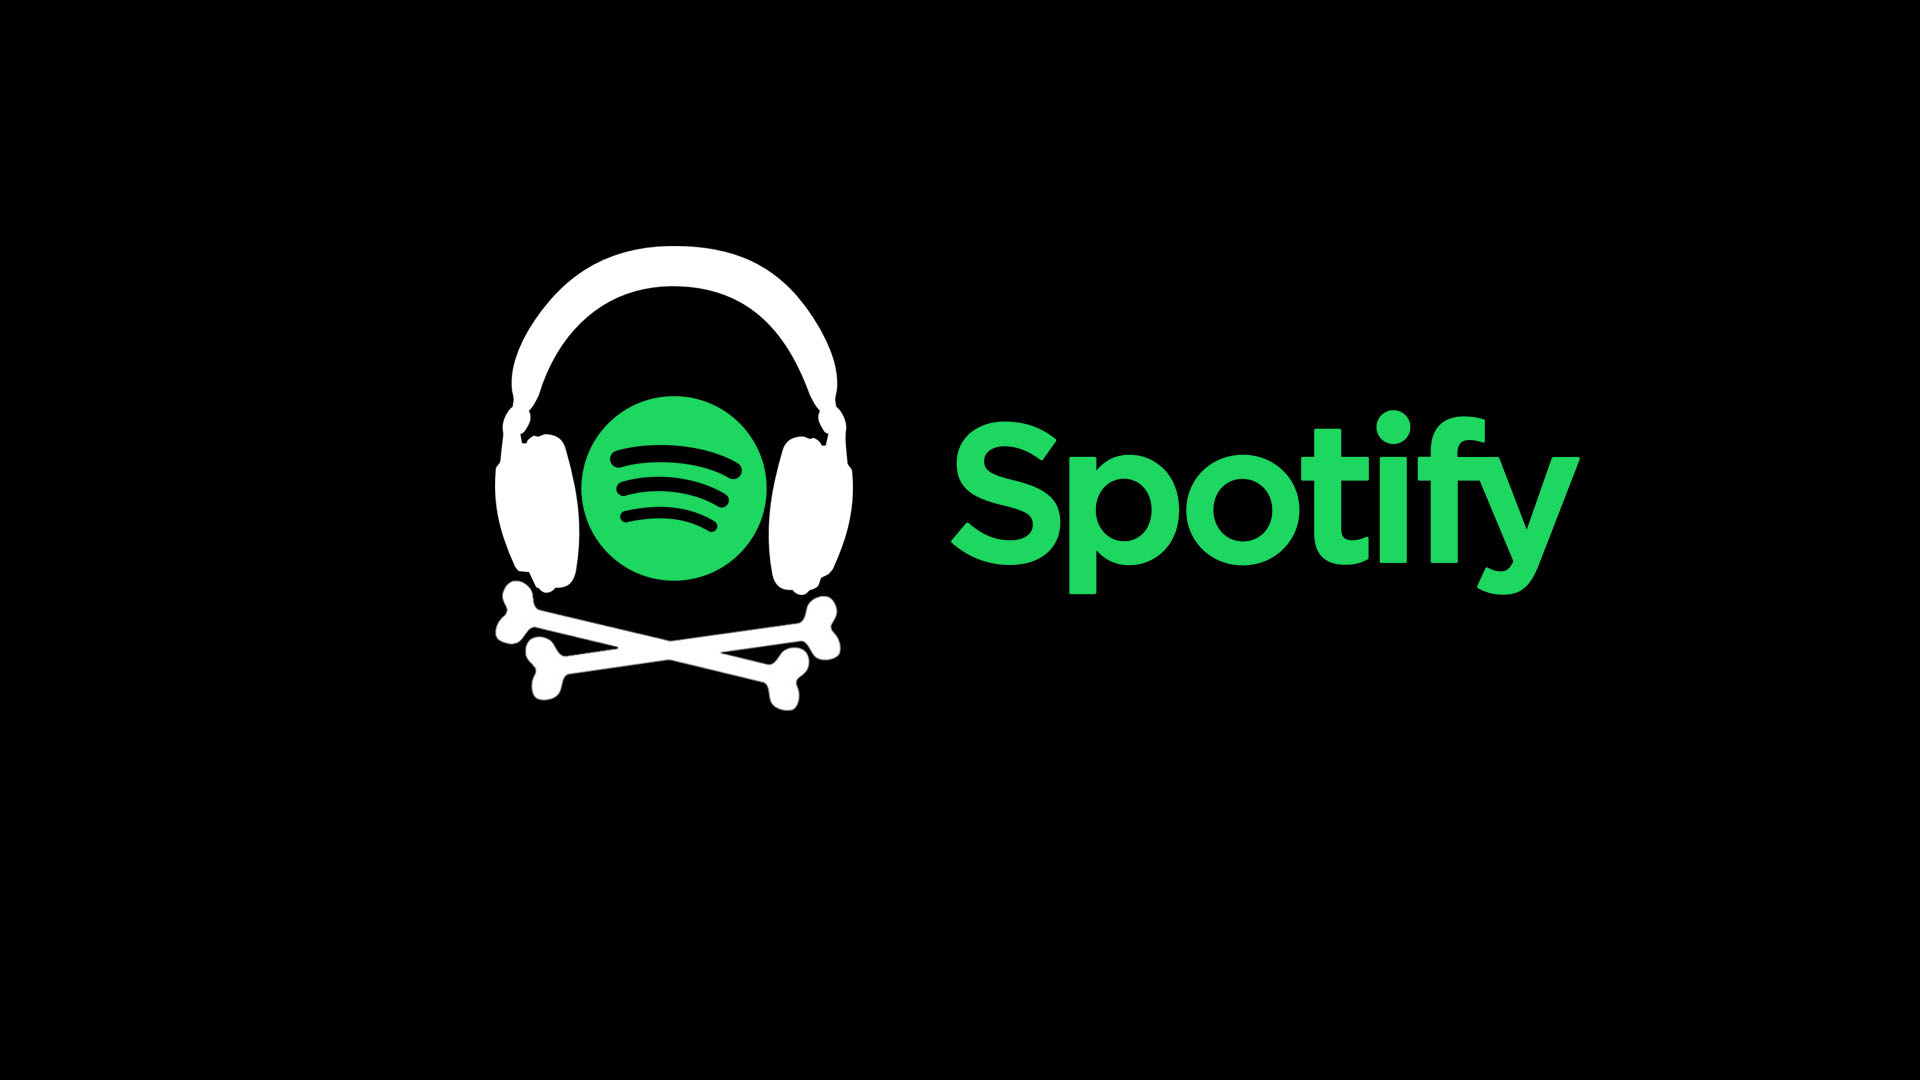 Spotify: Music service provider founded on 23 April 2006 by Daniel Ek and Martin Lorentzon. 1920x1080 Full HD Wallpaper.